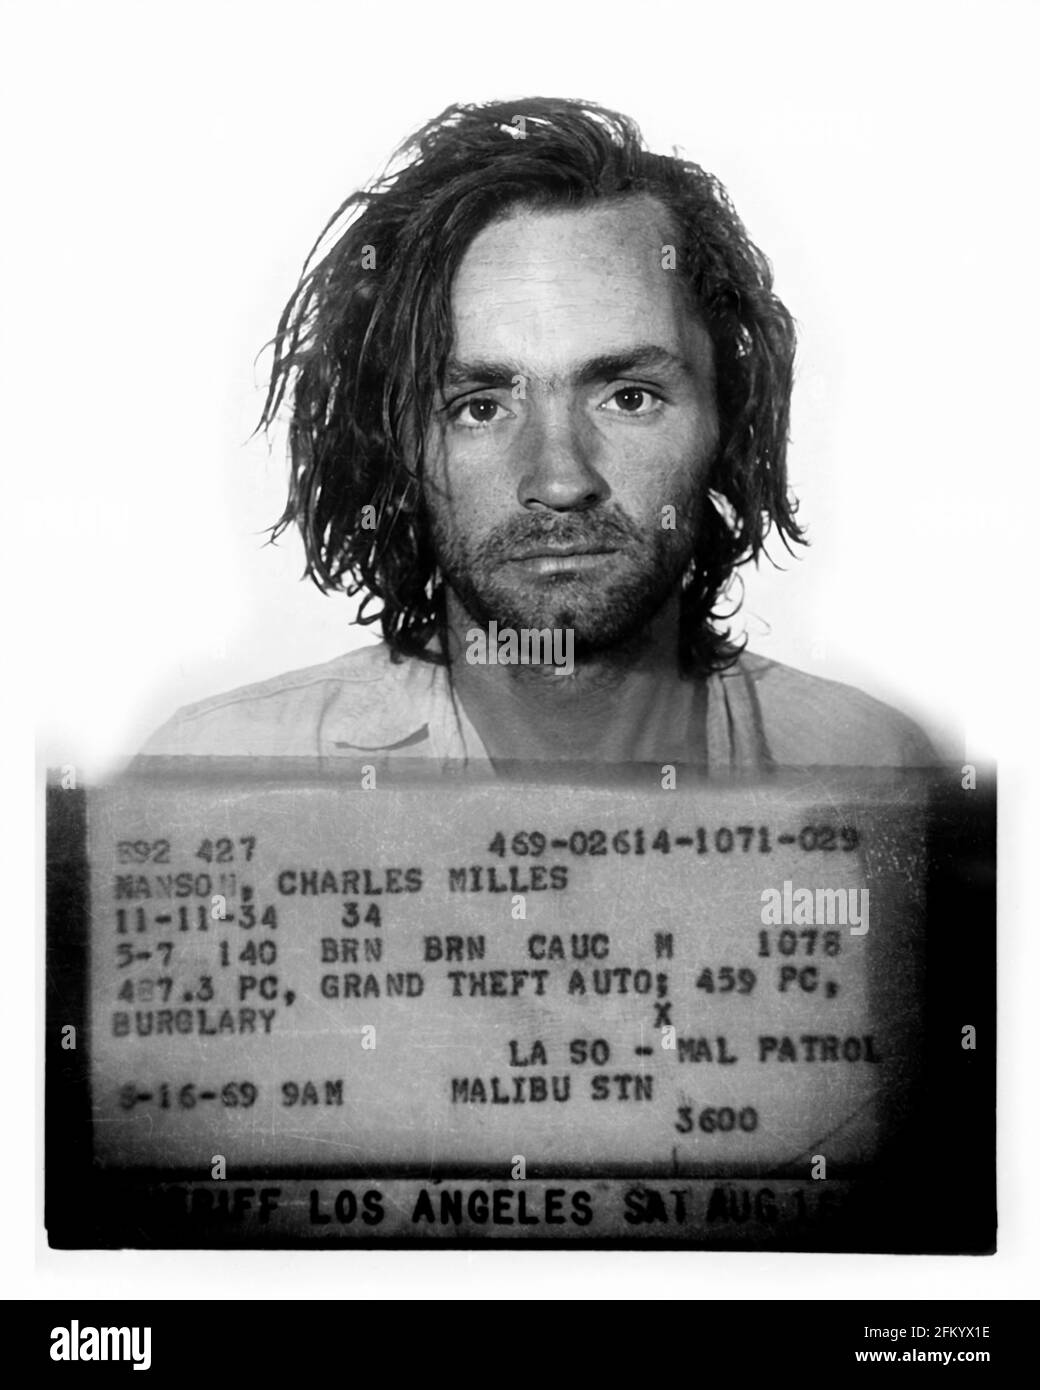 1969 , 16 august, USA : Mugshot of famous american satanist cult leader and criminal killer CHARLES Milles MANSON SATANA ( 1934 - 2017 ). In mid-1967, he formed what became known as the ' Manson Family ', a quasi-commune based in California. His followers committed a series of nine murders at four locations in July and August 1969 . In 1971, he was convicted of first-degree murder and conspiracy to commit murder for the deaths of seven people, including the film actress Sharon Tate . Unknown photographer of Ventura California Prison , California Department of Corrections and Rehabilitation mug Stock Photo